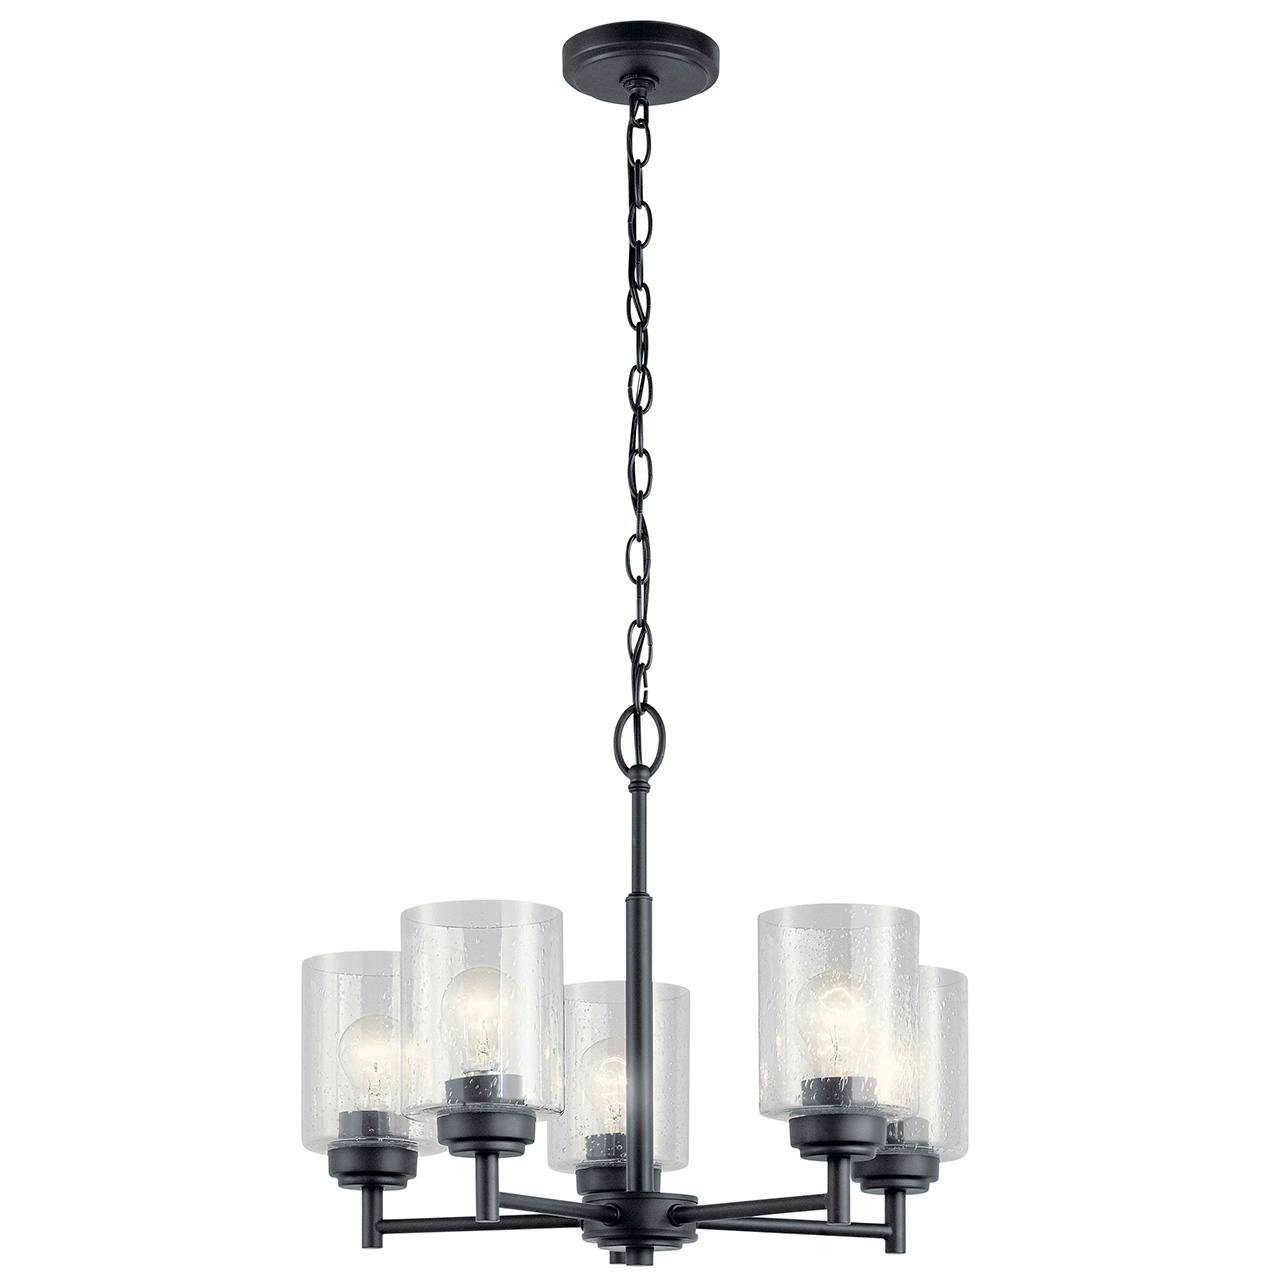 The Winslow™ 5 Light Chandelier Black facing up on a white background